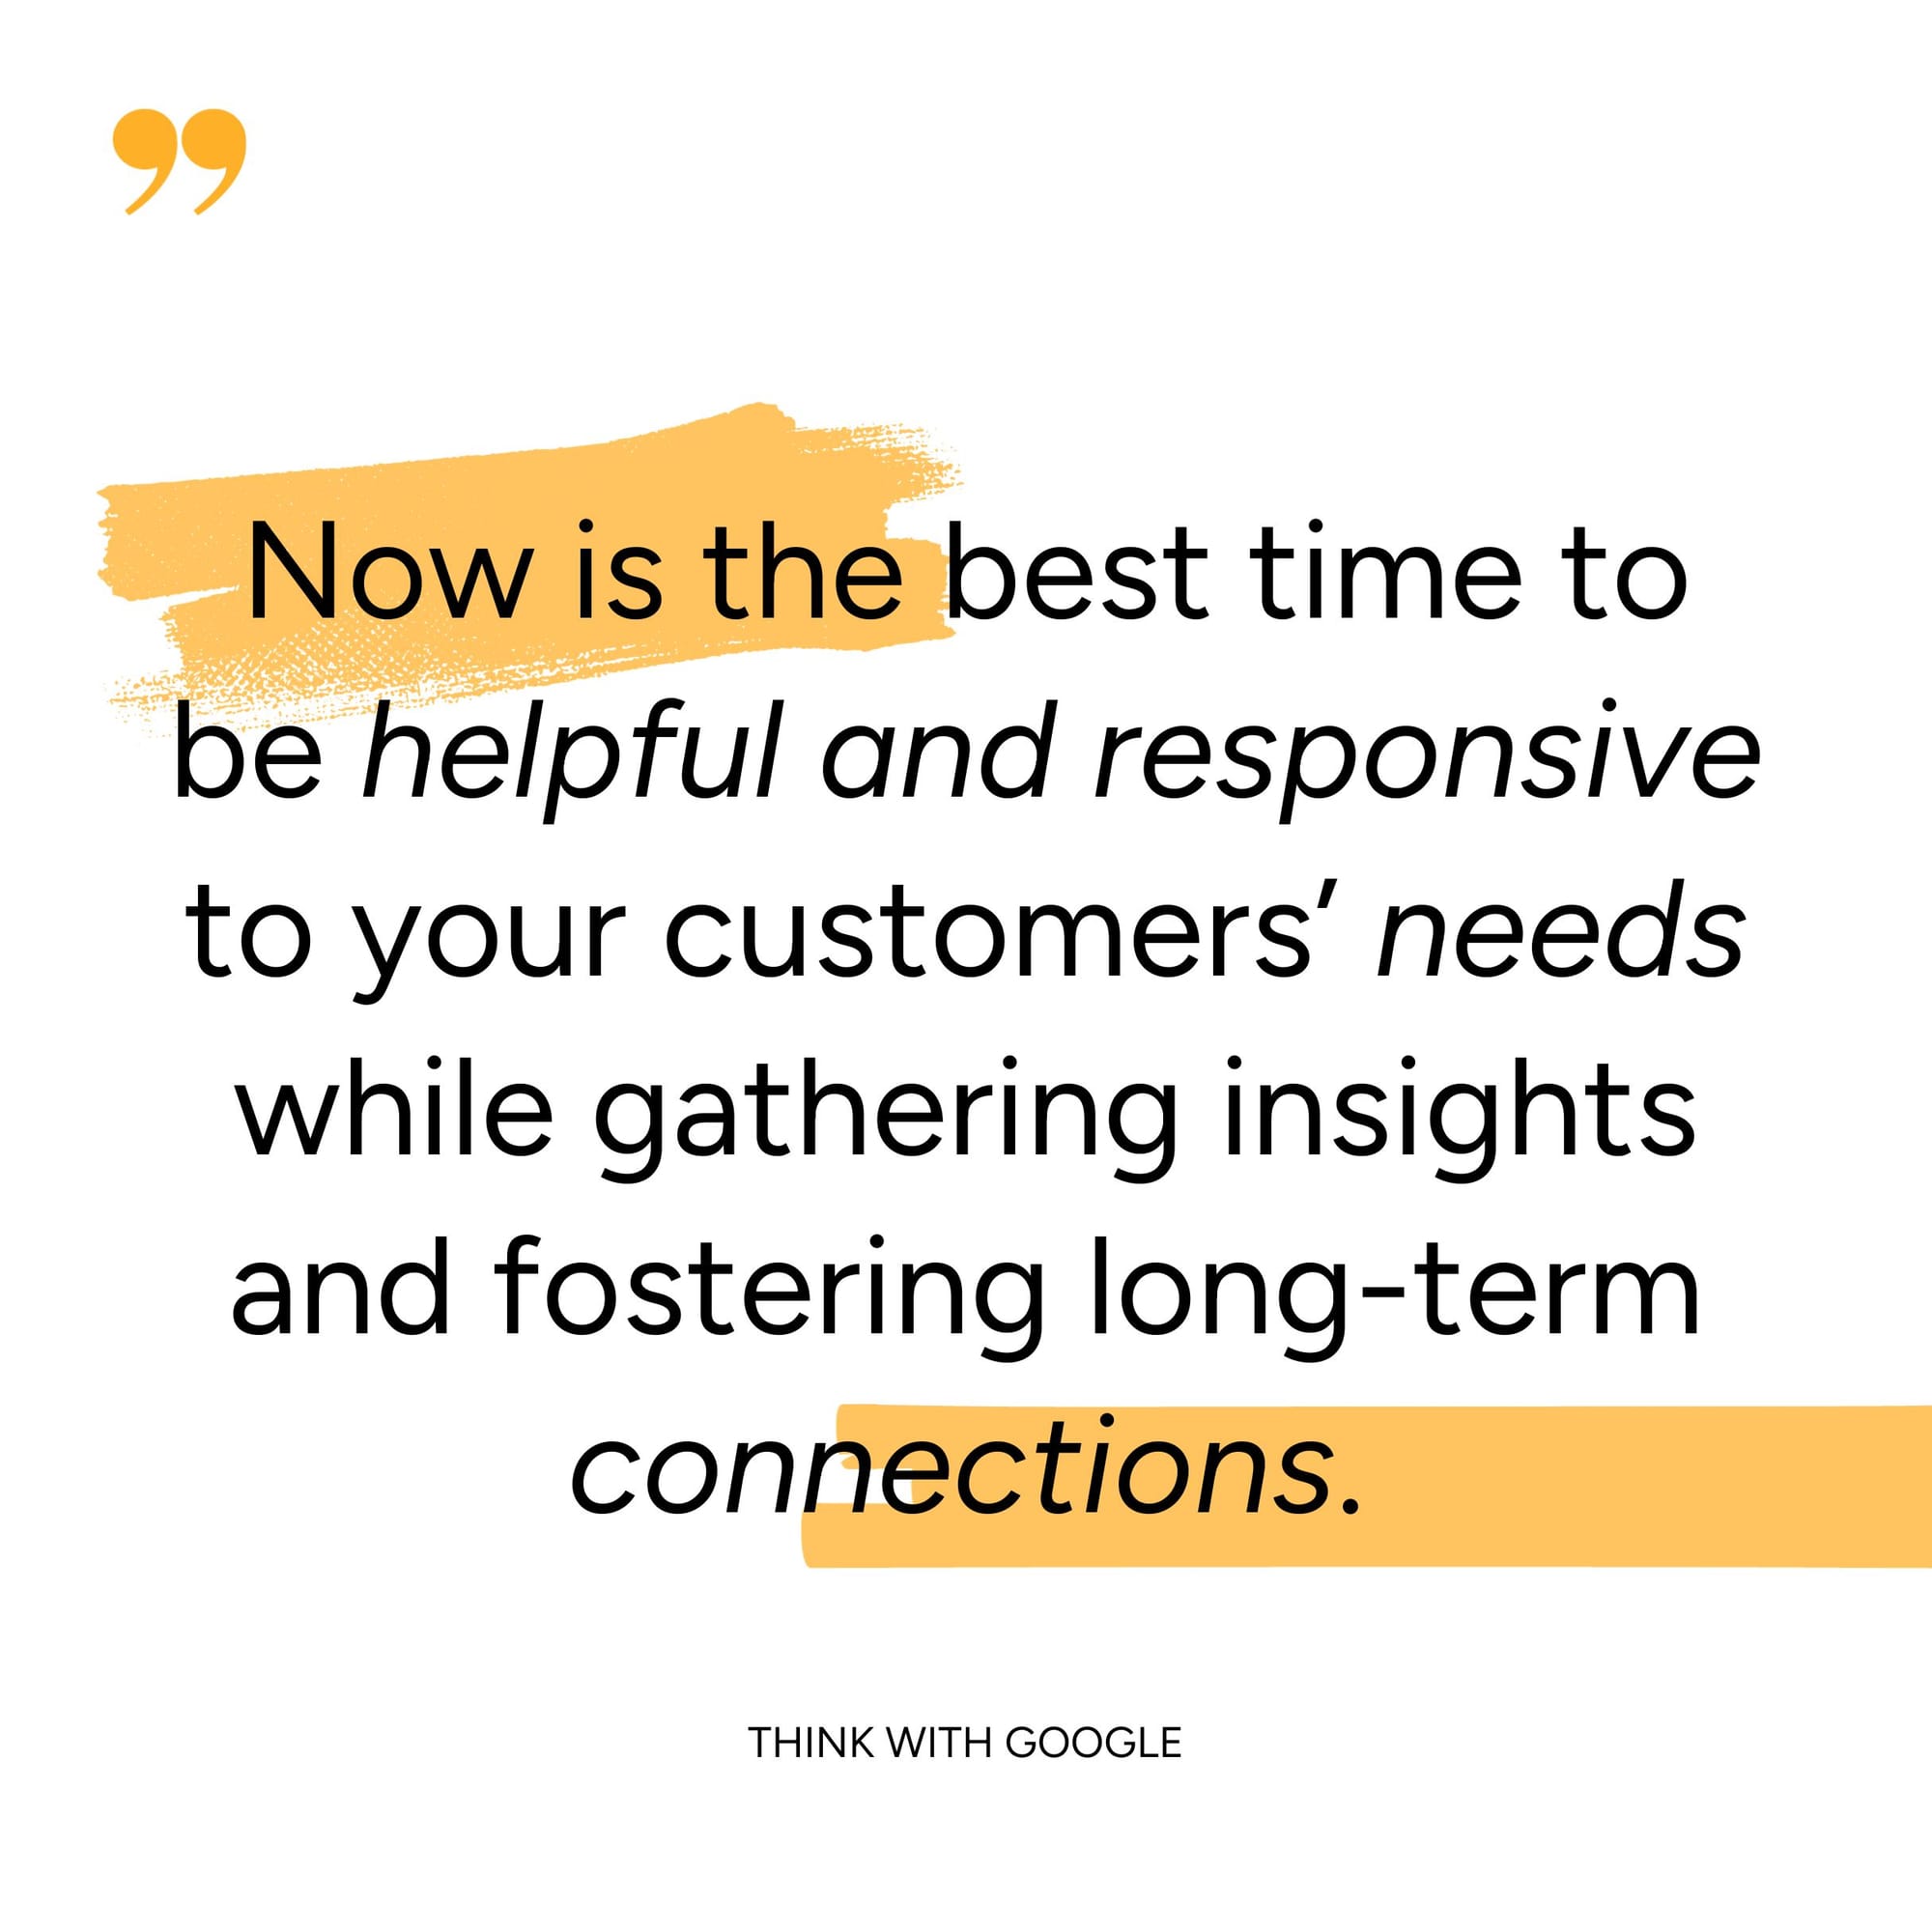 "Now is the time to be helpful and responsive to your customers' needs while gathering insights and fostering long-term connections" (Think with Google). ClickFunnels uses and encourages bro-marketing tactics, which are focused on the sale first with little to no focus on building long-term relationships. Google believes consumers have made a permanent shift, seeking out businesses that take the time and effort to make a genuine connection. 